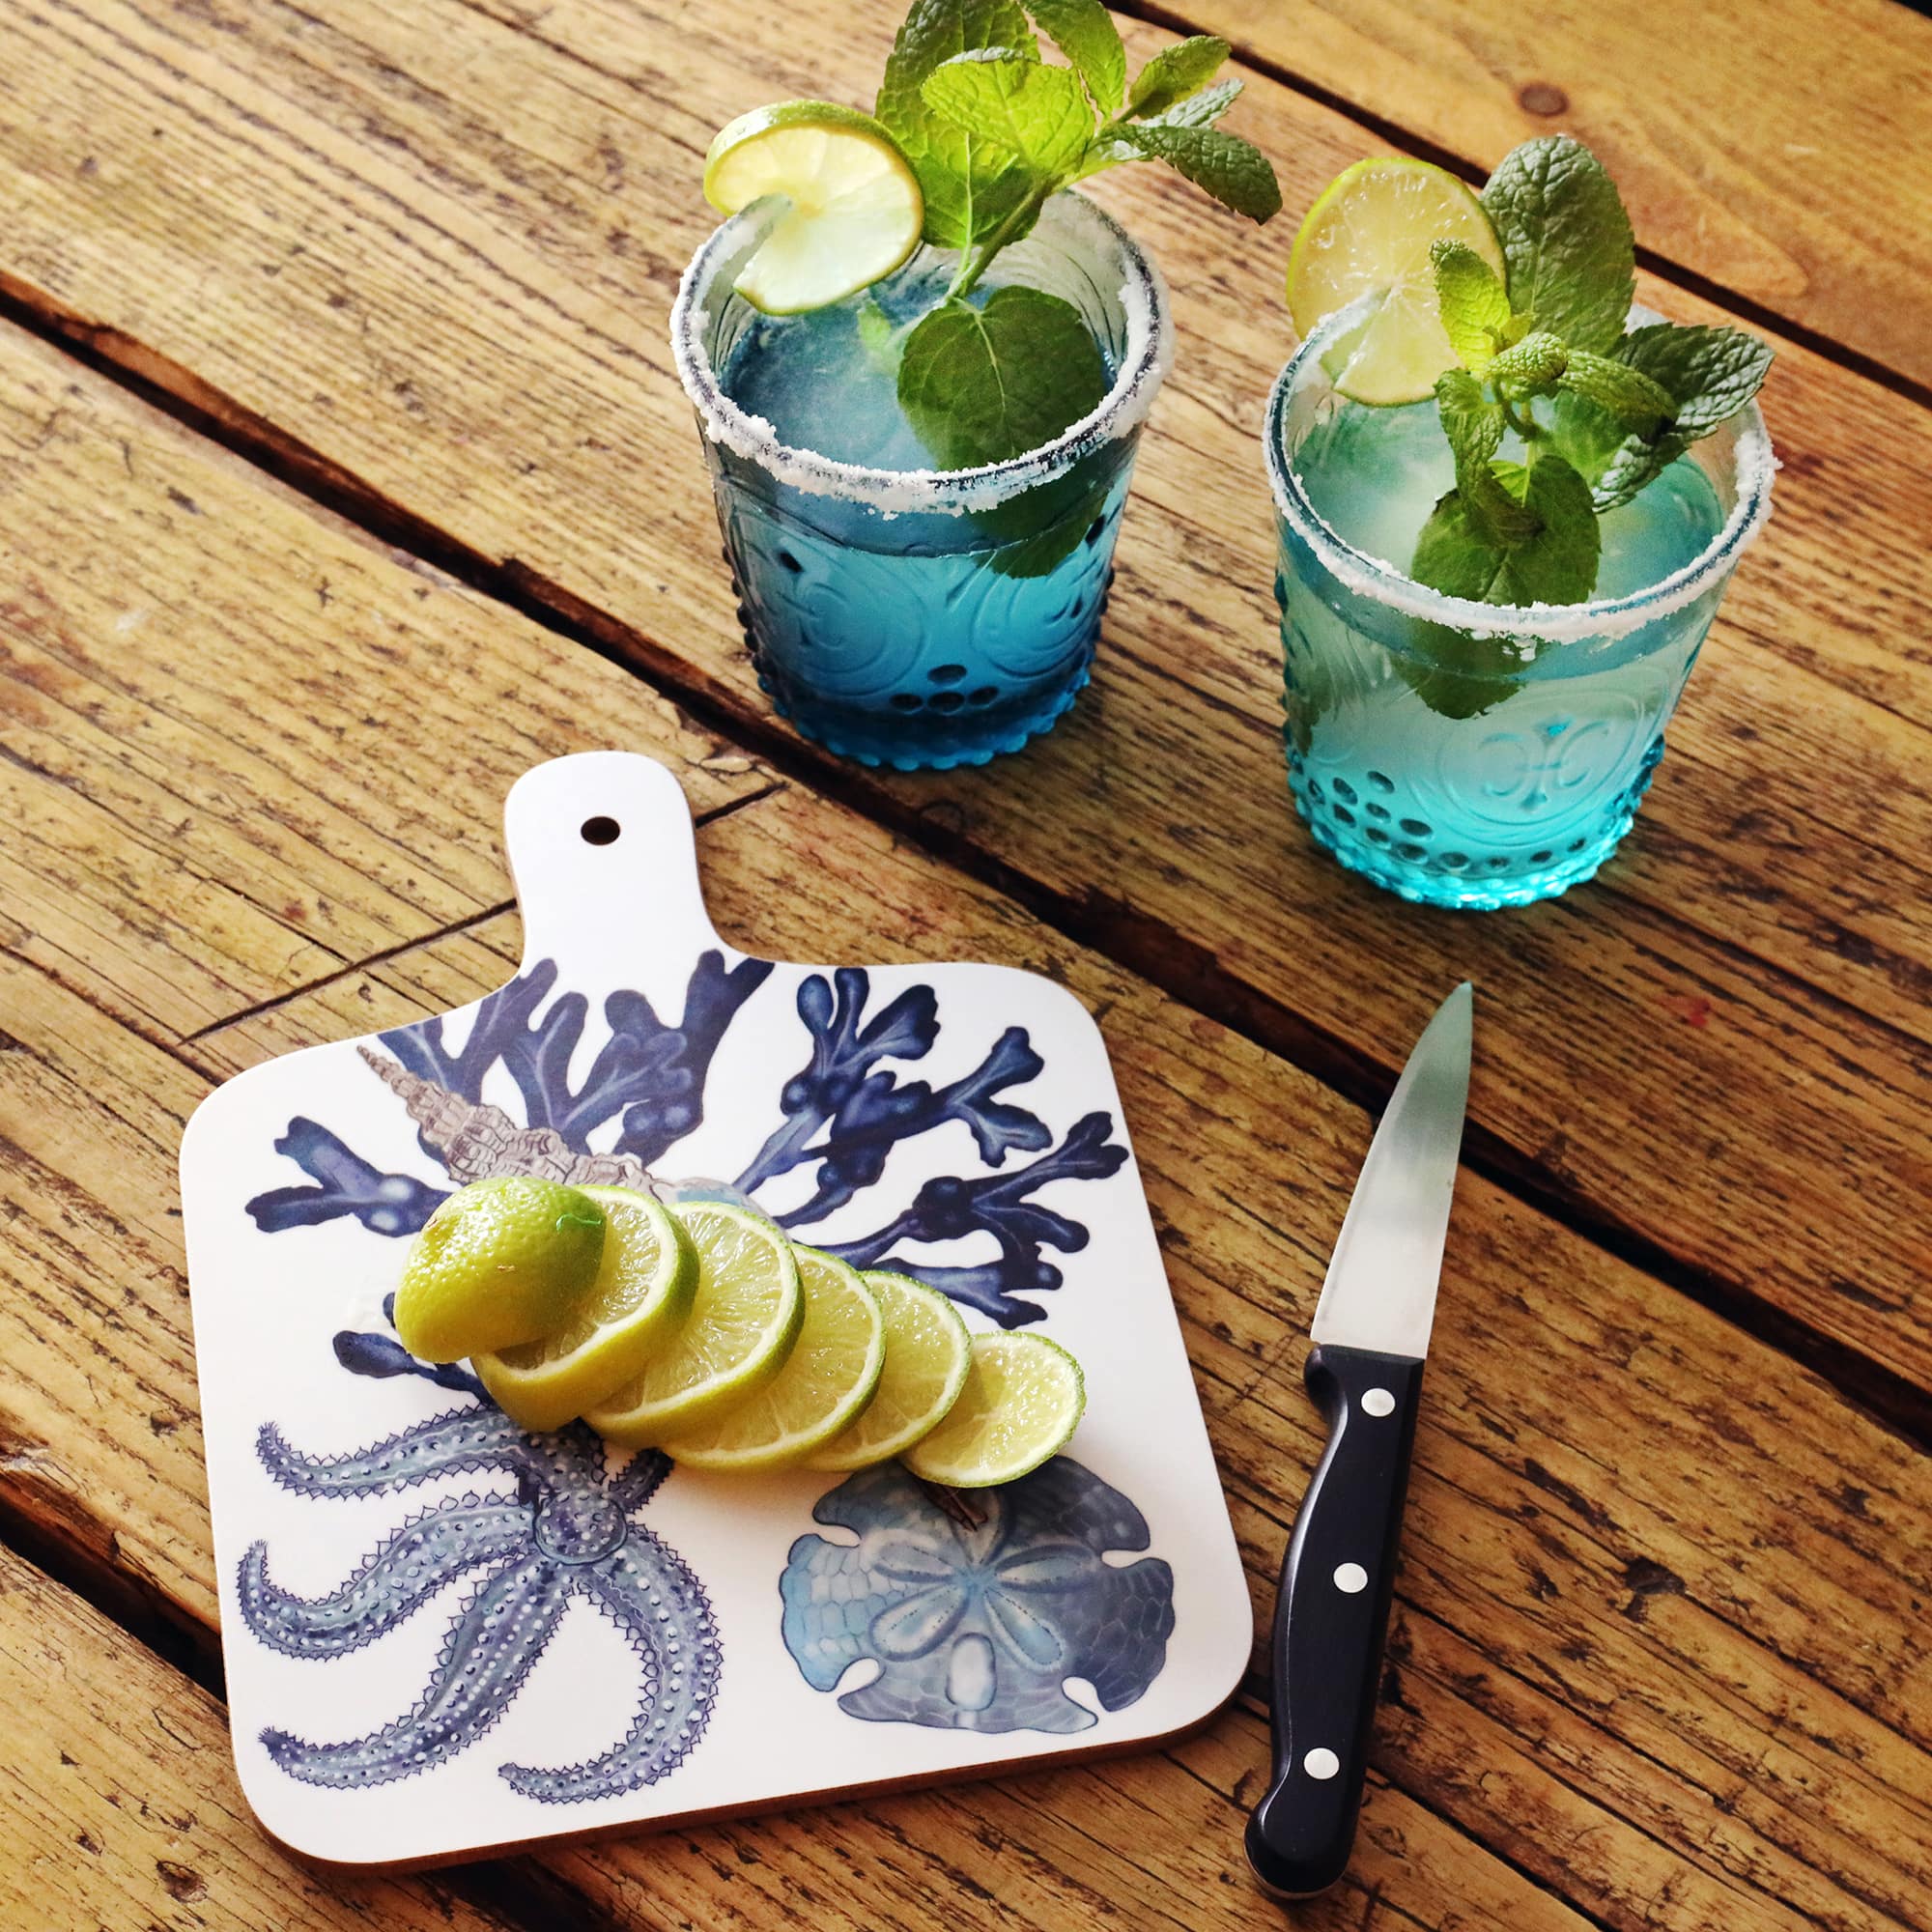 Beachcomber Chopping Board placed on a wooden table.On the board is a sliced lime next to a knife,also on the table are filled blue coloured glasses